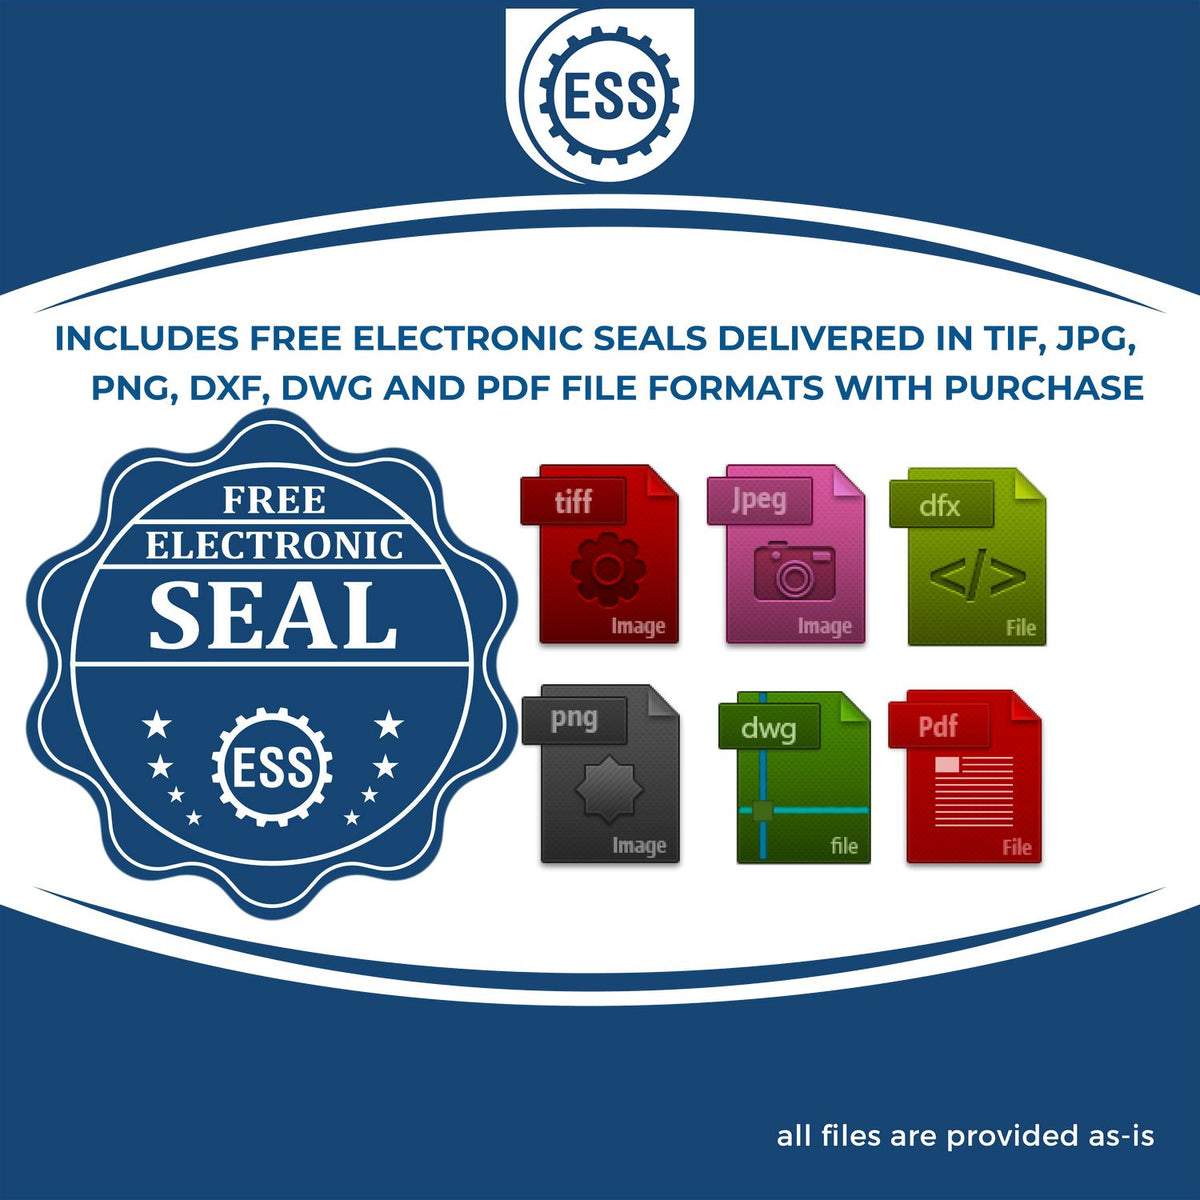 An infographic for the free electronic seal for the Hybrid Kentucky Landscape Architect Seal illustrating the different file type icons such as DXF, DWG, TIF, JPG and PNG.